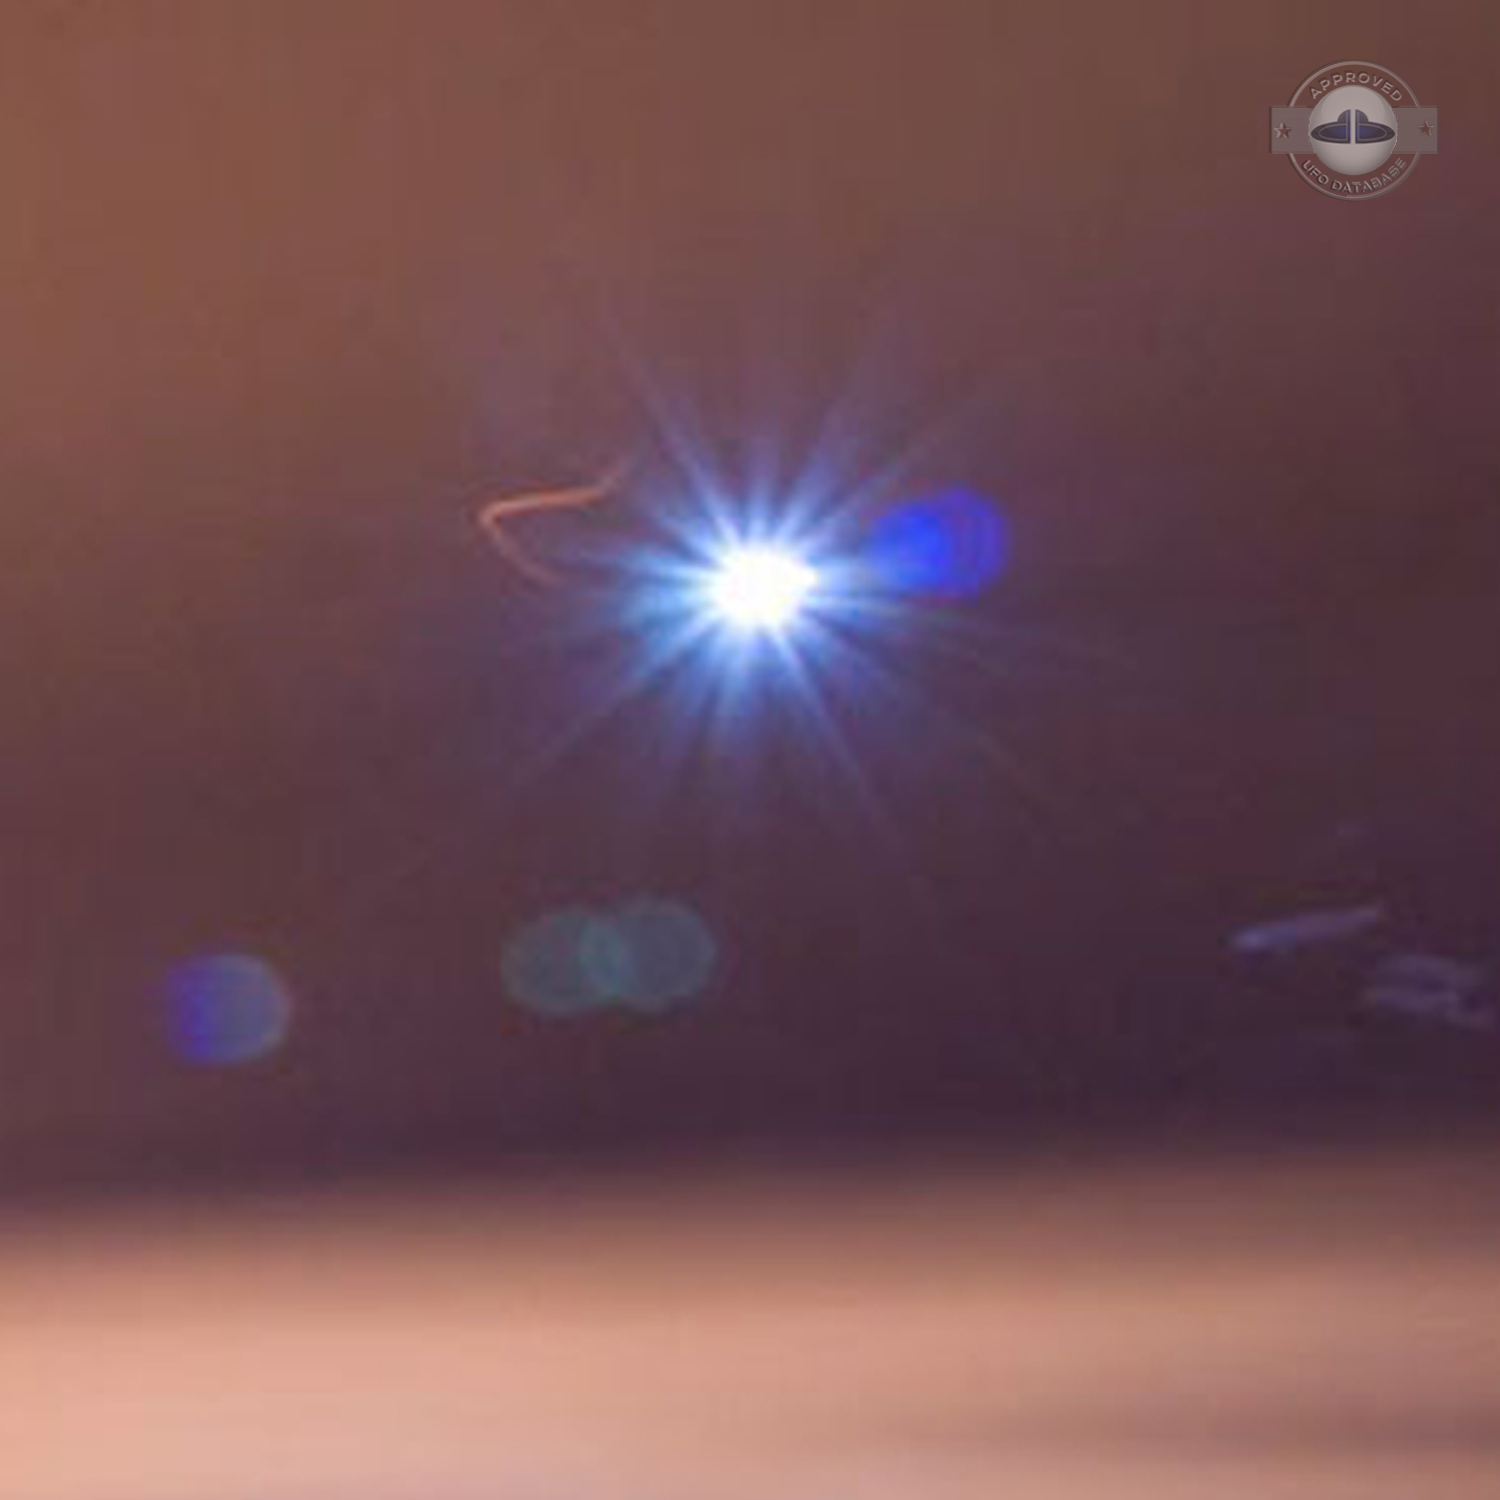 Bright glowing UFO caught on picture during long exposure | England UFO Picture #218-4